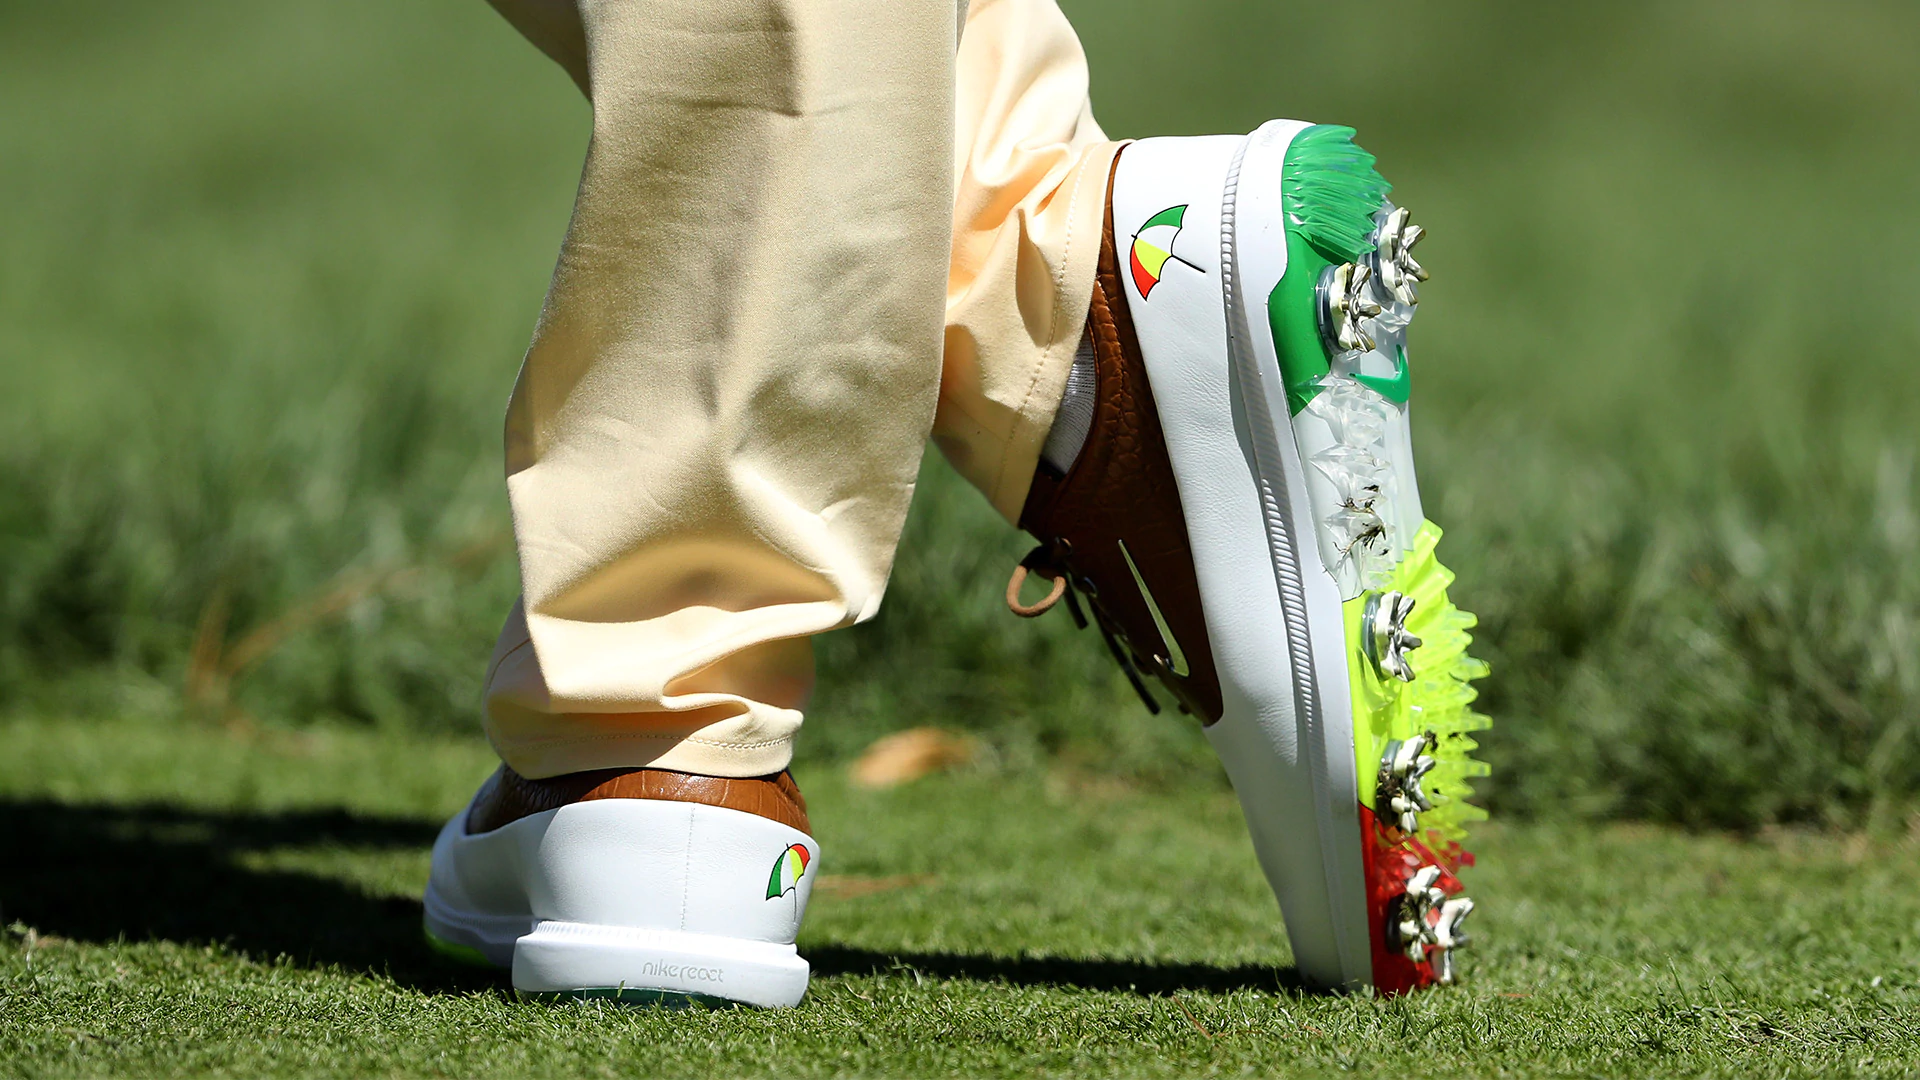 PGA Tour players honor the King with Arnie-inspired clothes and gear